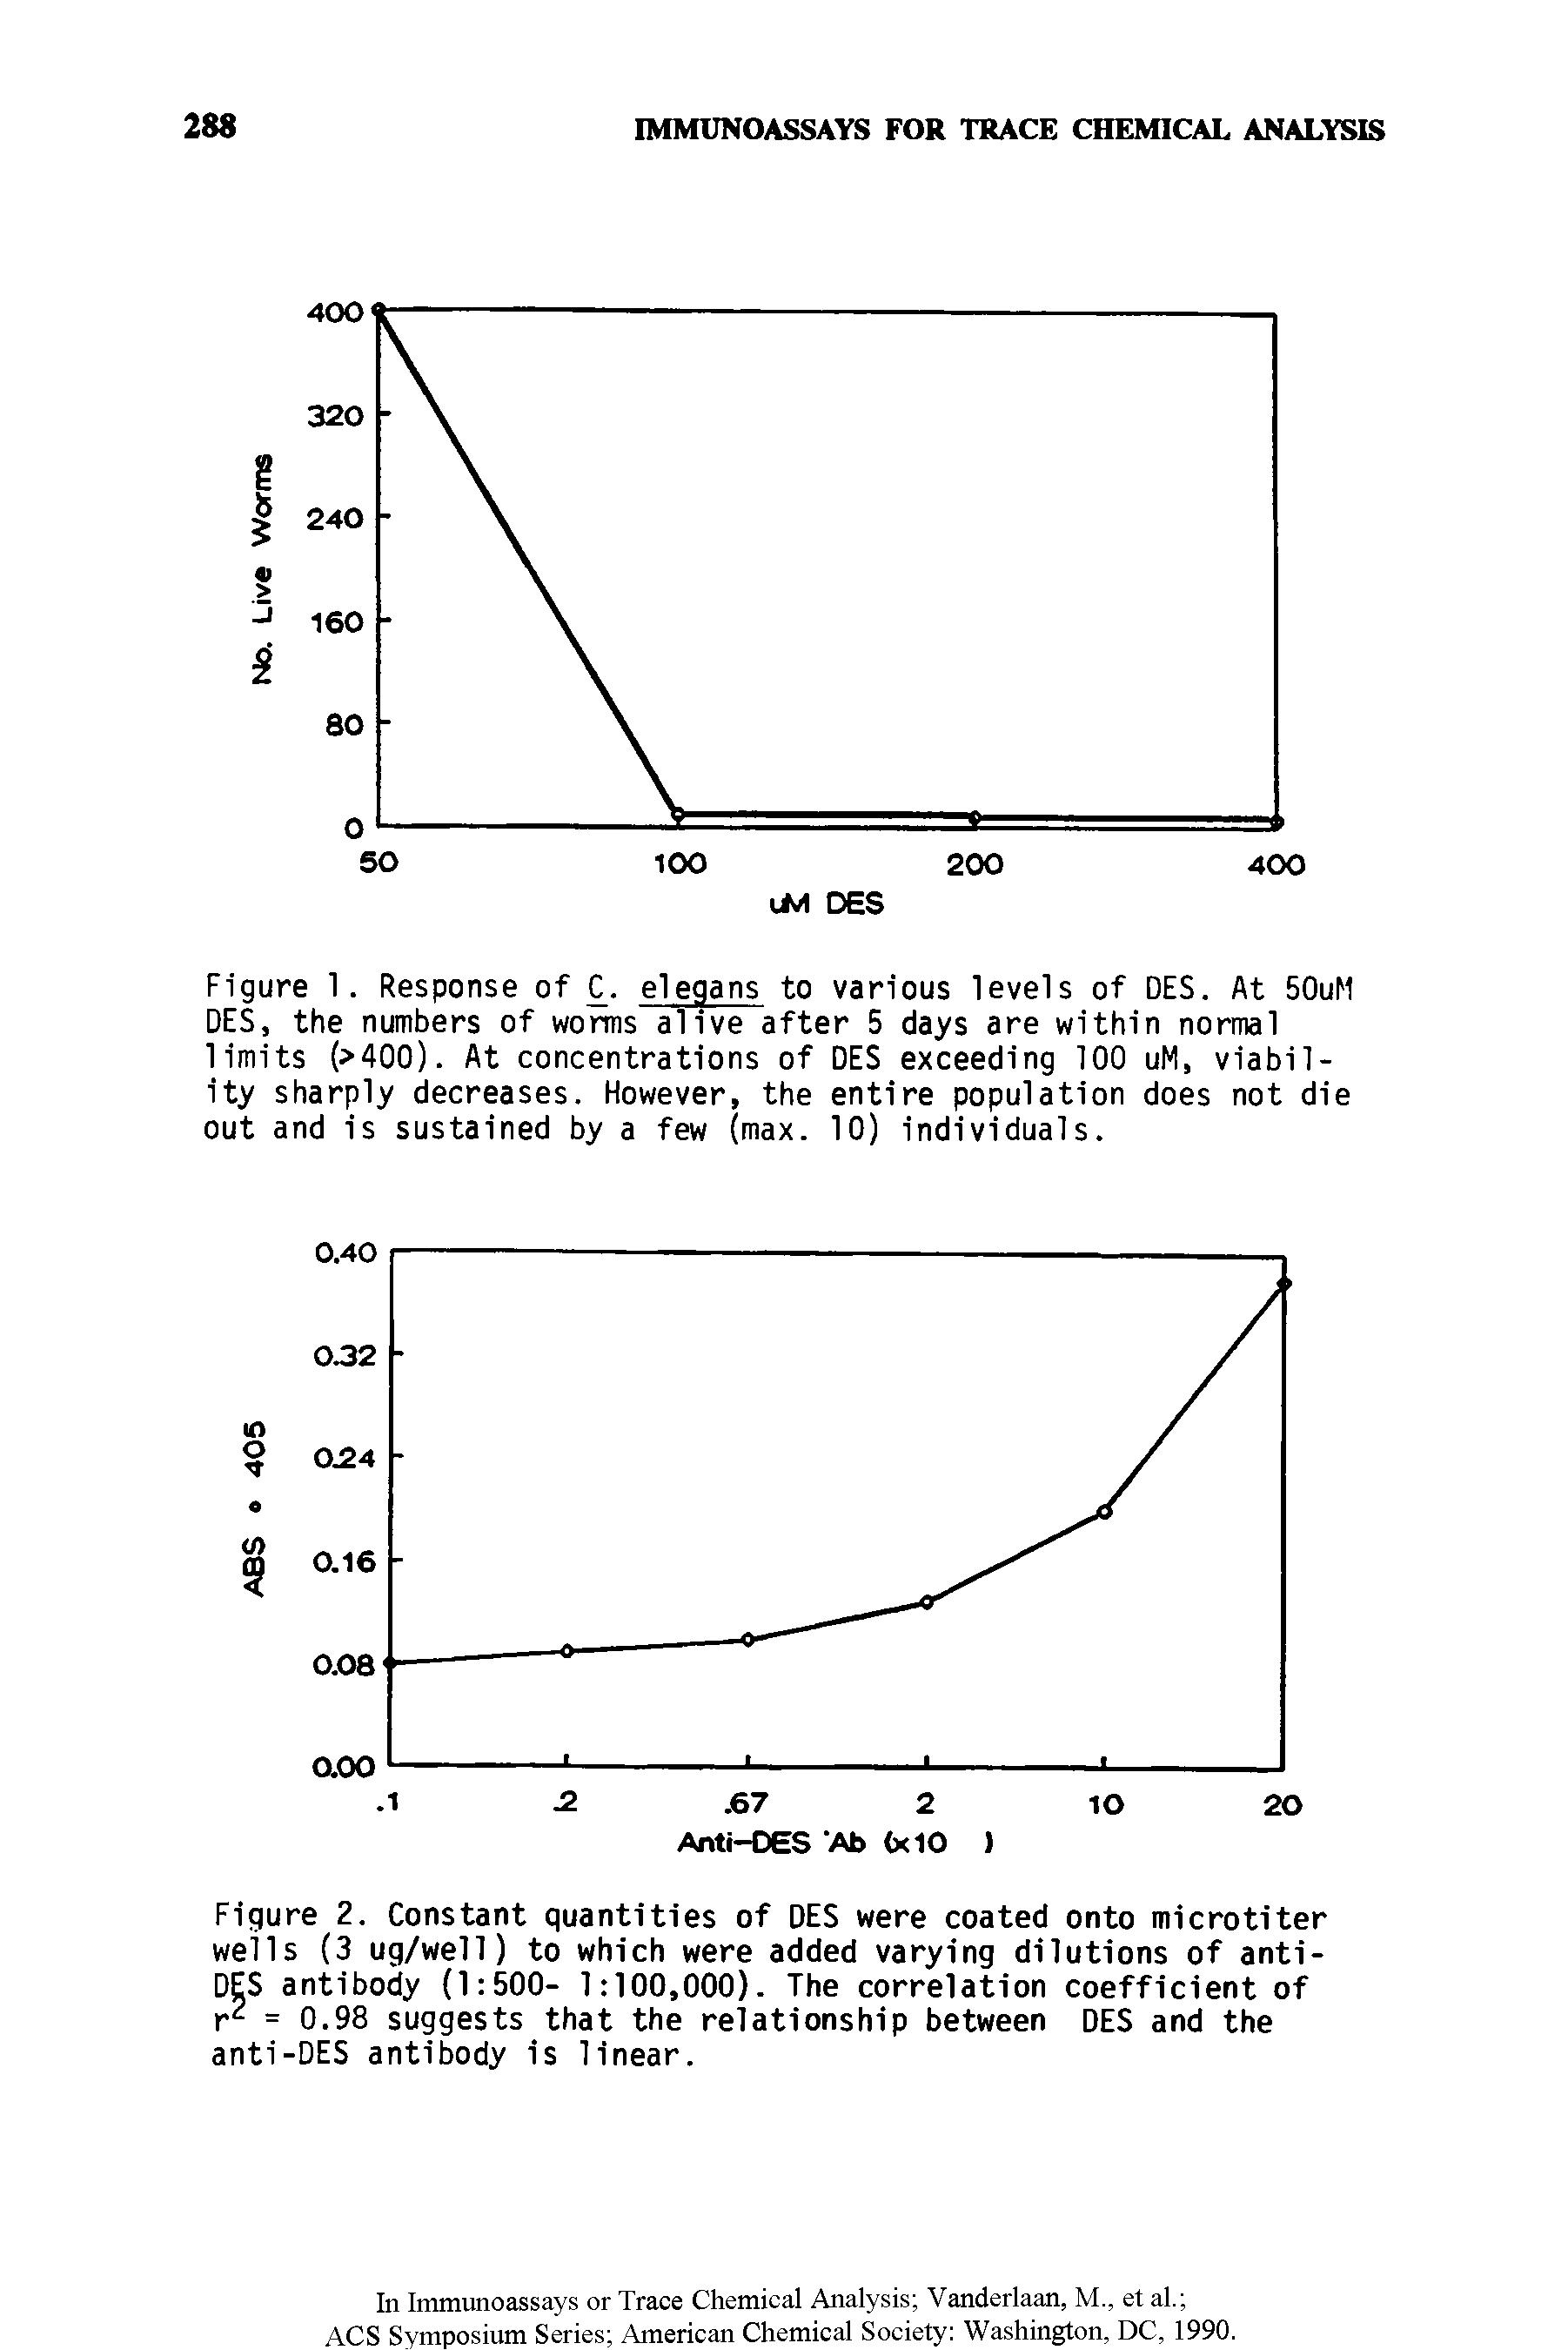 Figure 2. Constant quantities of DES were coated onto microtiter wells (3 ug/well) to which were added varying dilutions of antl-DES antibody (1 500- 1 100,000). The correlation coefficient of r = 0.98 suggests that the relationship between DES and the anti-DES antibody Is linear.